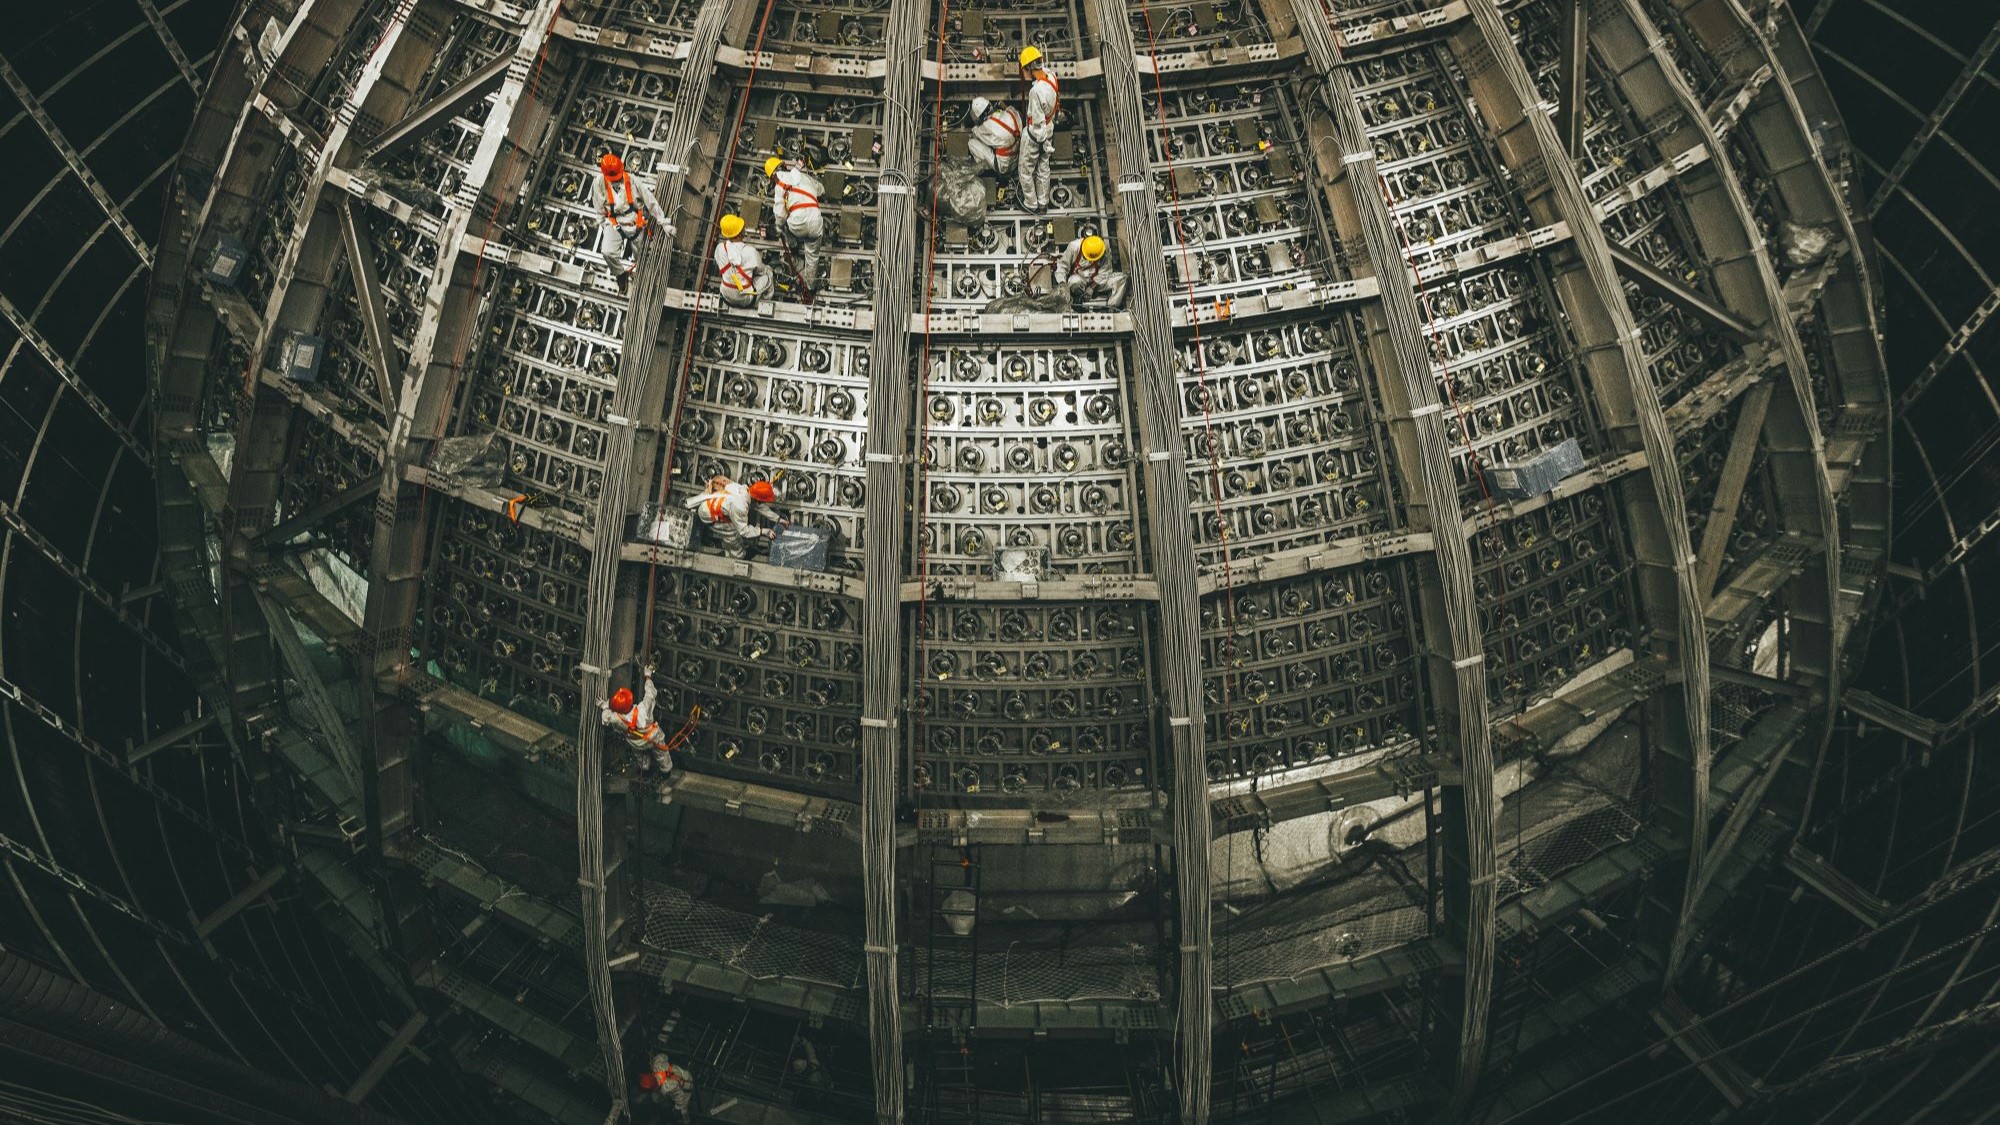 A metal sphere under construction as workers climb over it.